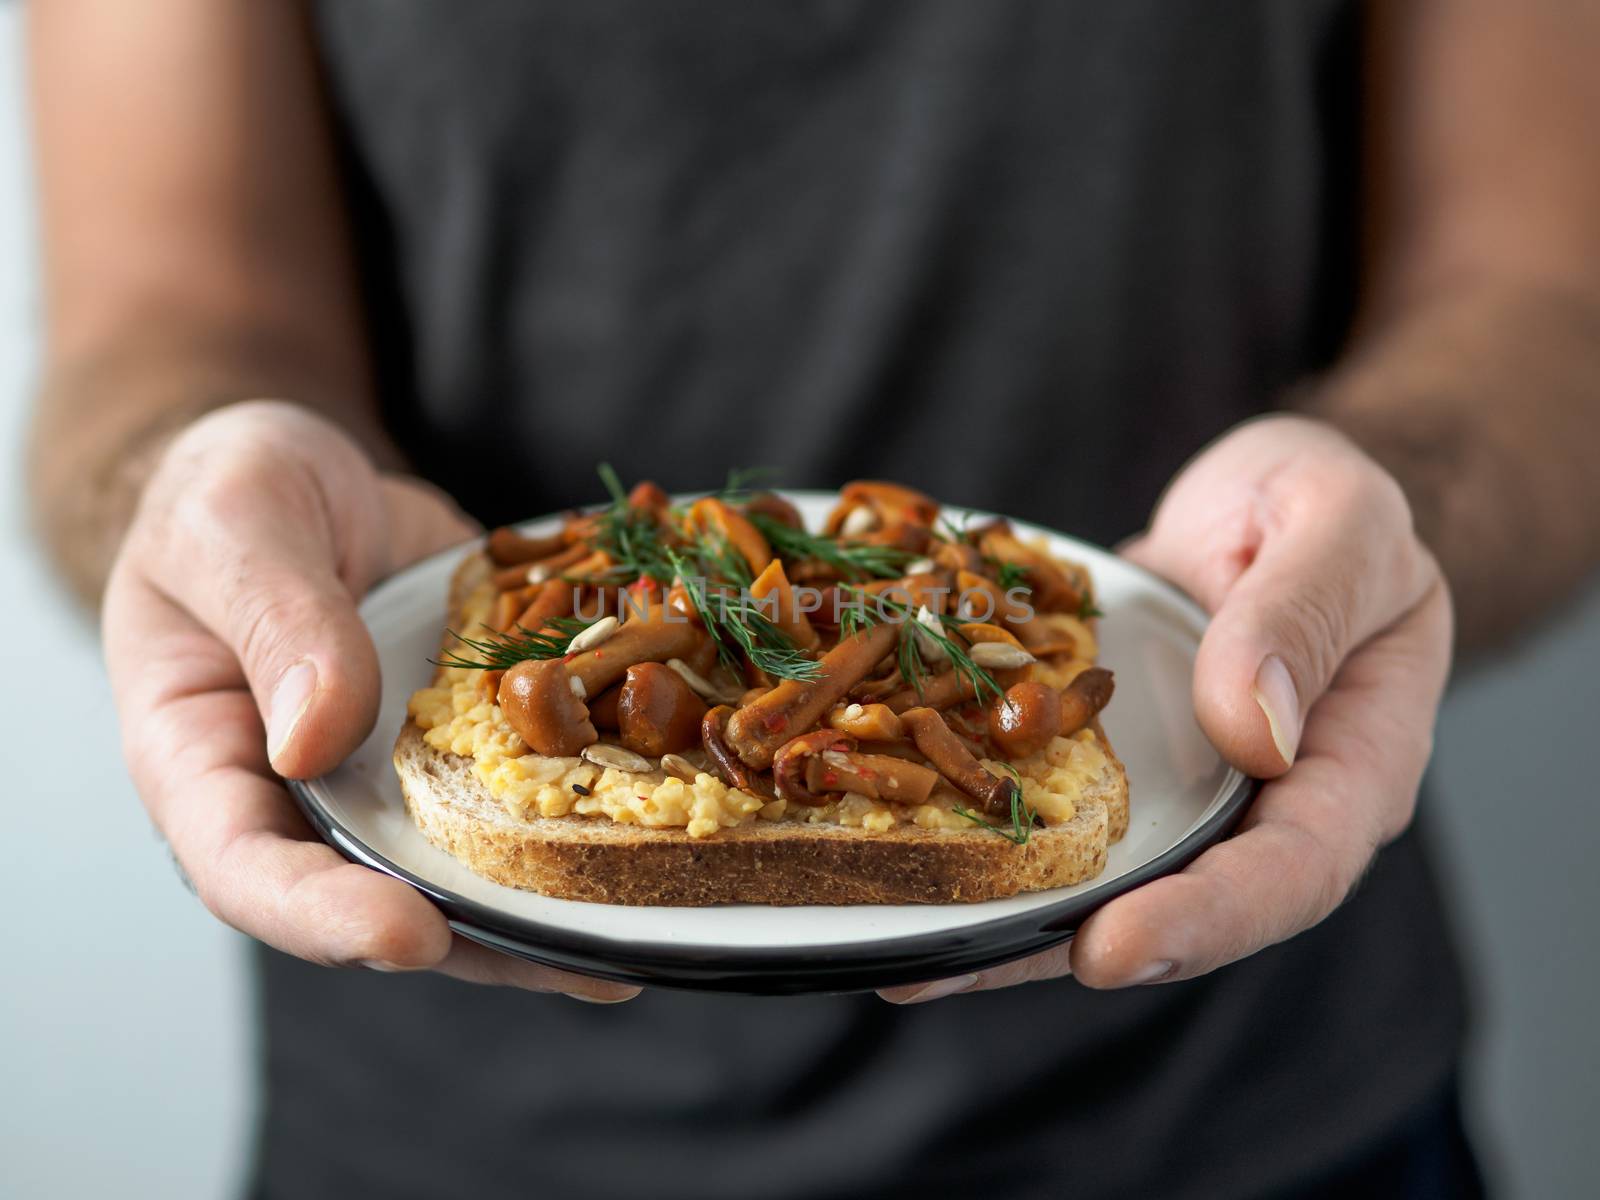 Hands takes plate with vegan sandwich. Healthy appetiezer - whole wheat bread toast with chickpea hummus and honey fungus mushrooms